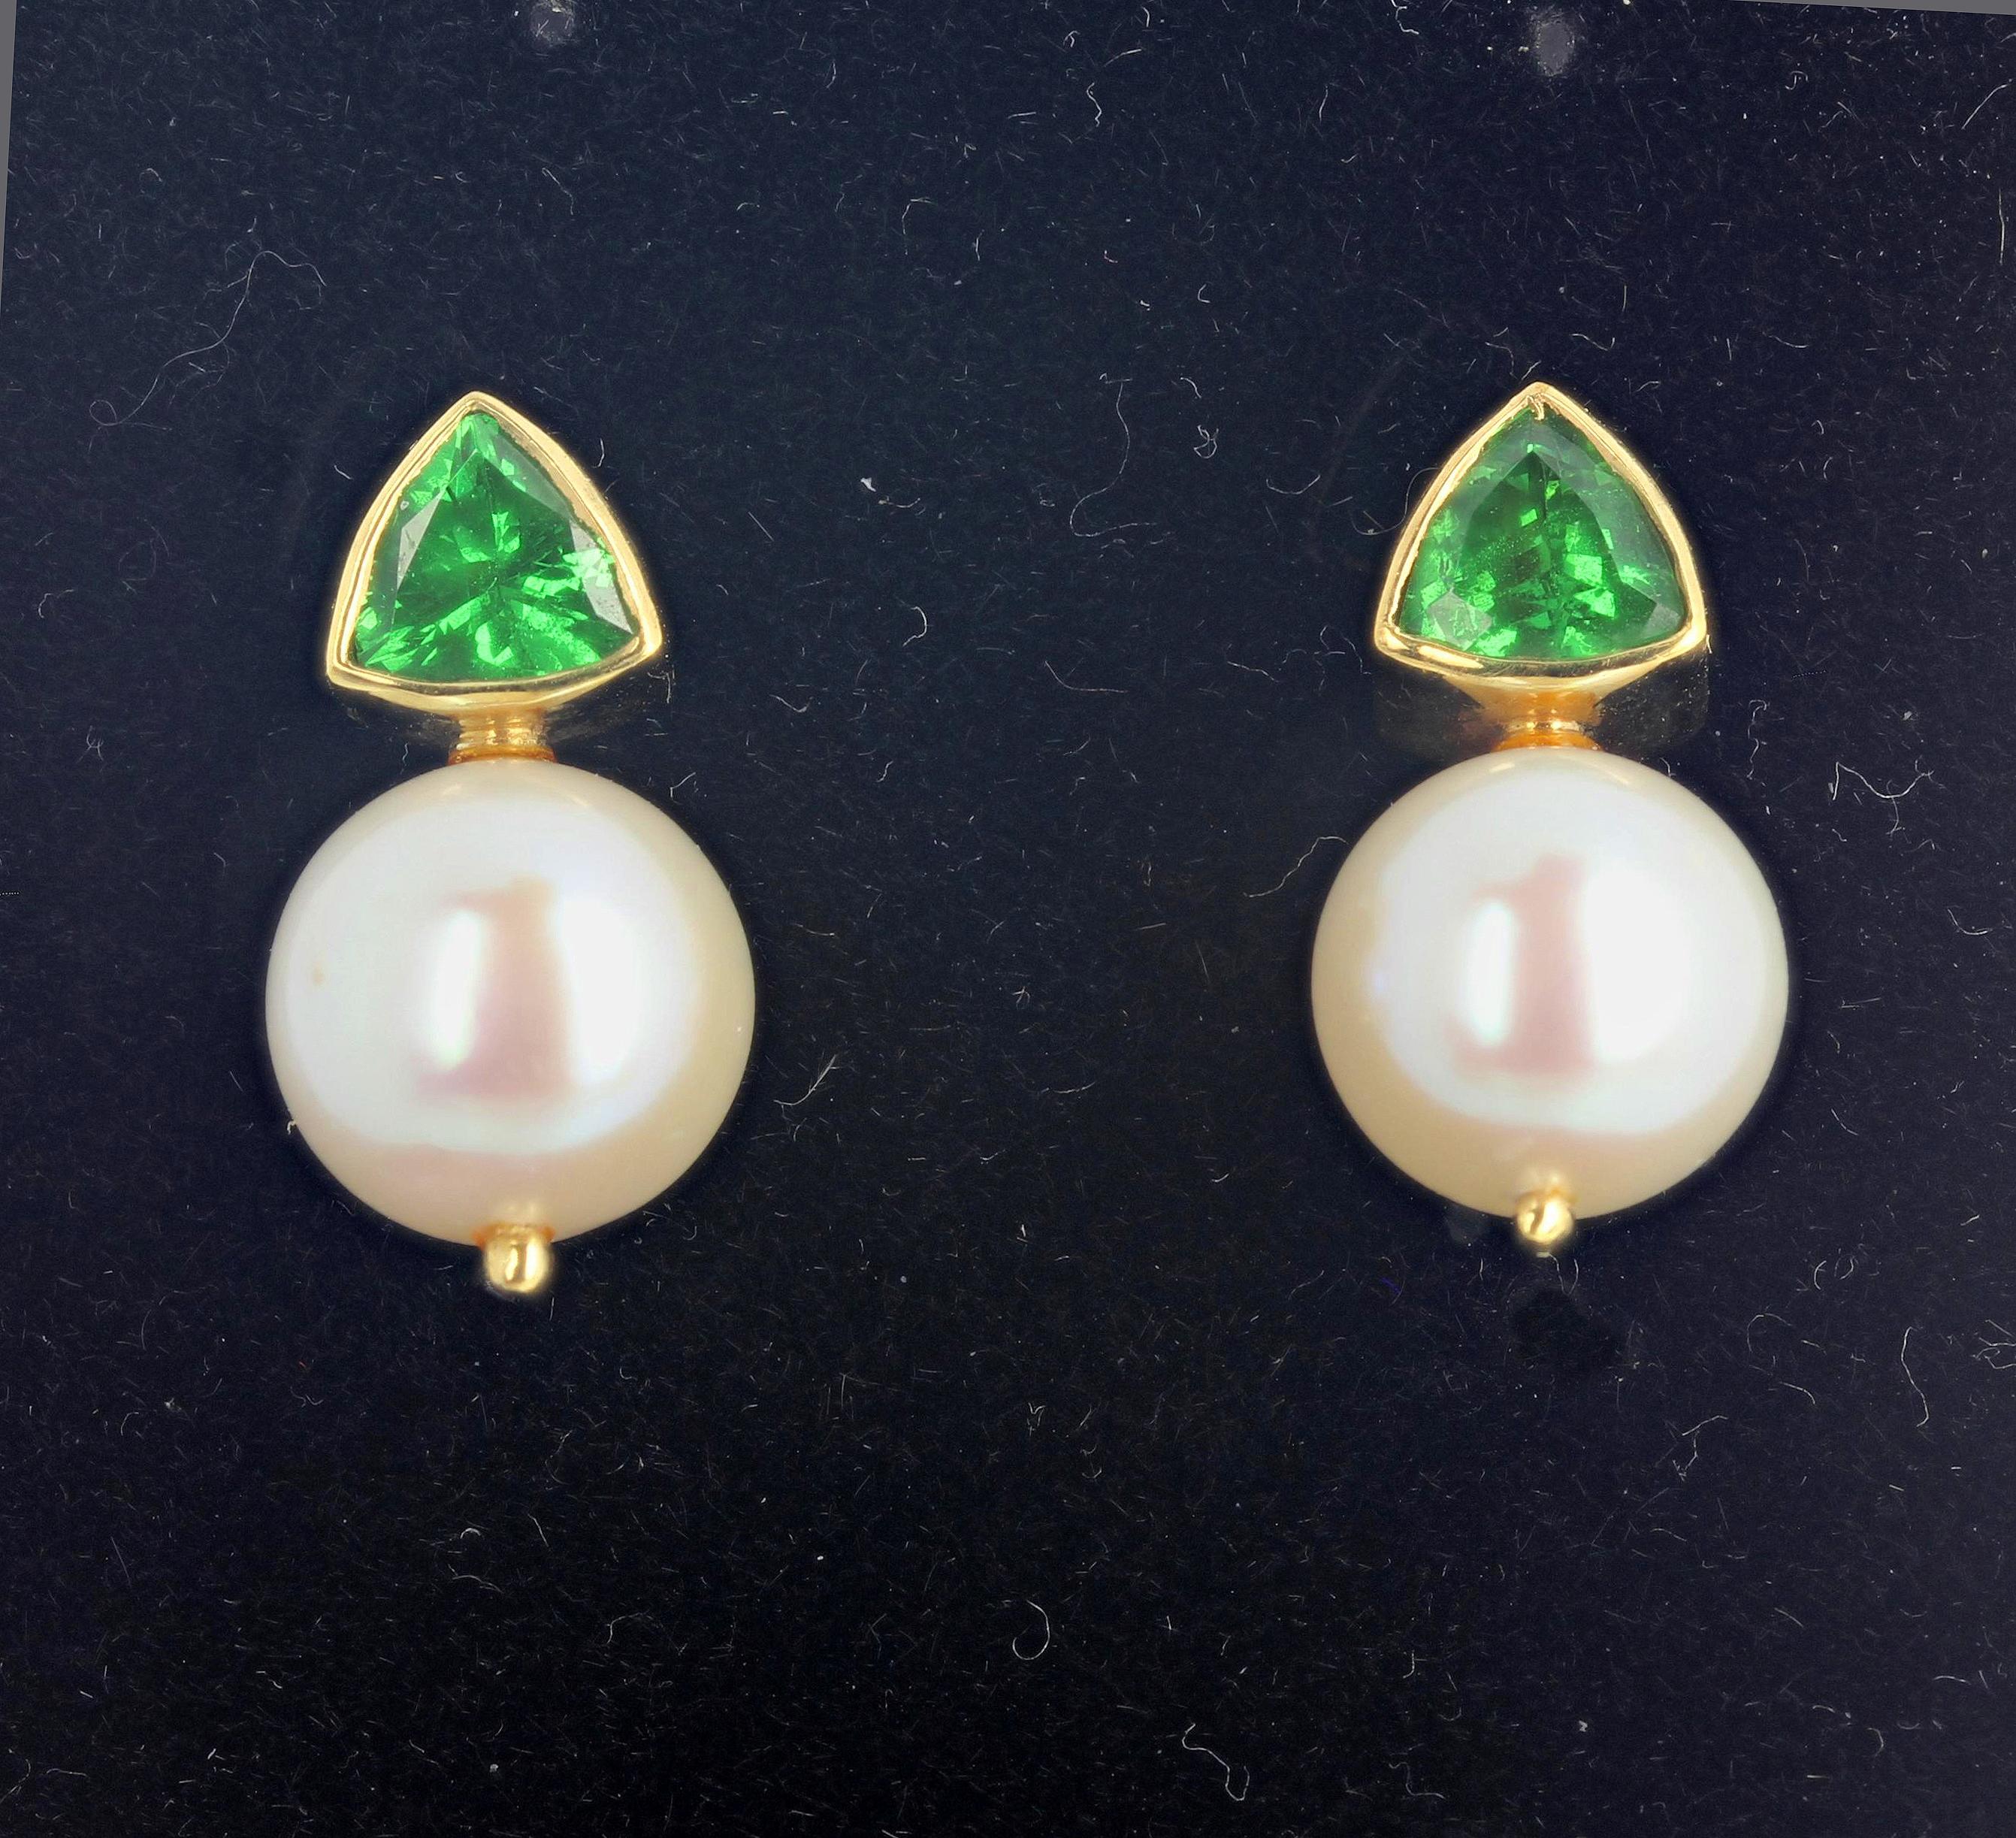 Beautiful glittering green rare natural real Tsavorites (more or less 1.25 carats each) are enhanced by lovely round real Cultured Pearls set in 18 KT yellow gold stud earrings.  They hang approximately 18 mm long.  If you wish faster delivery on